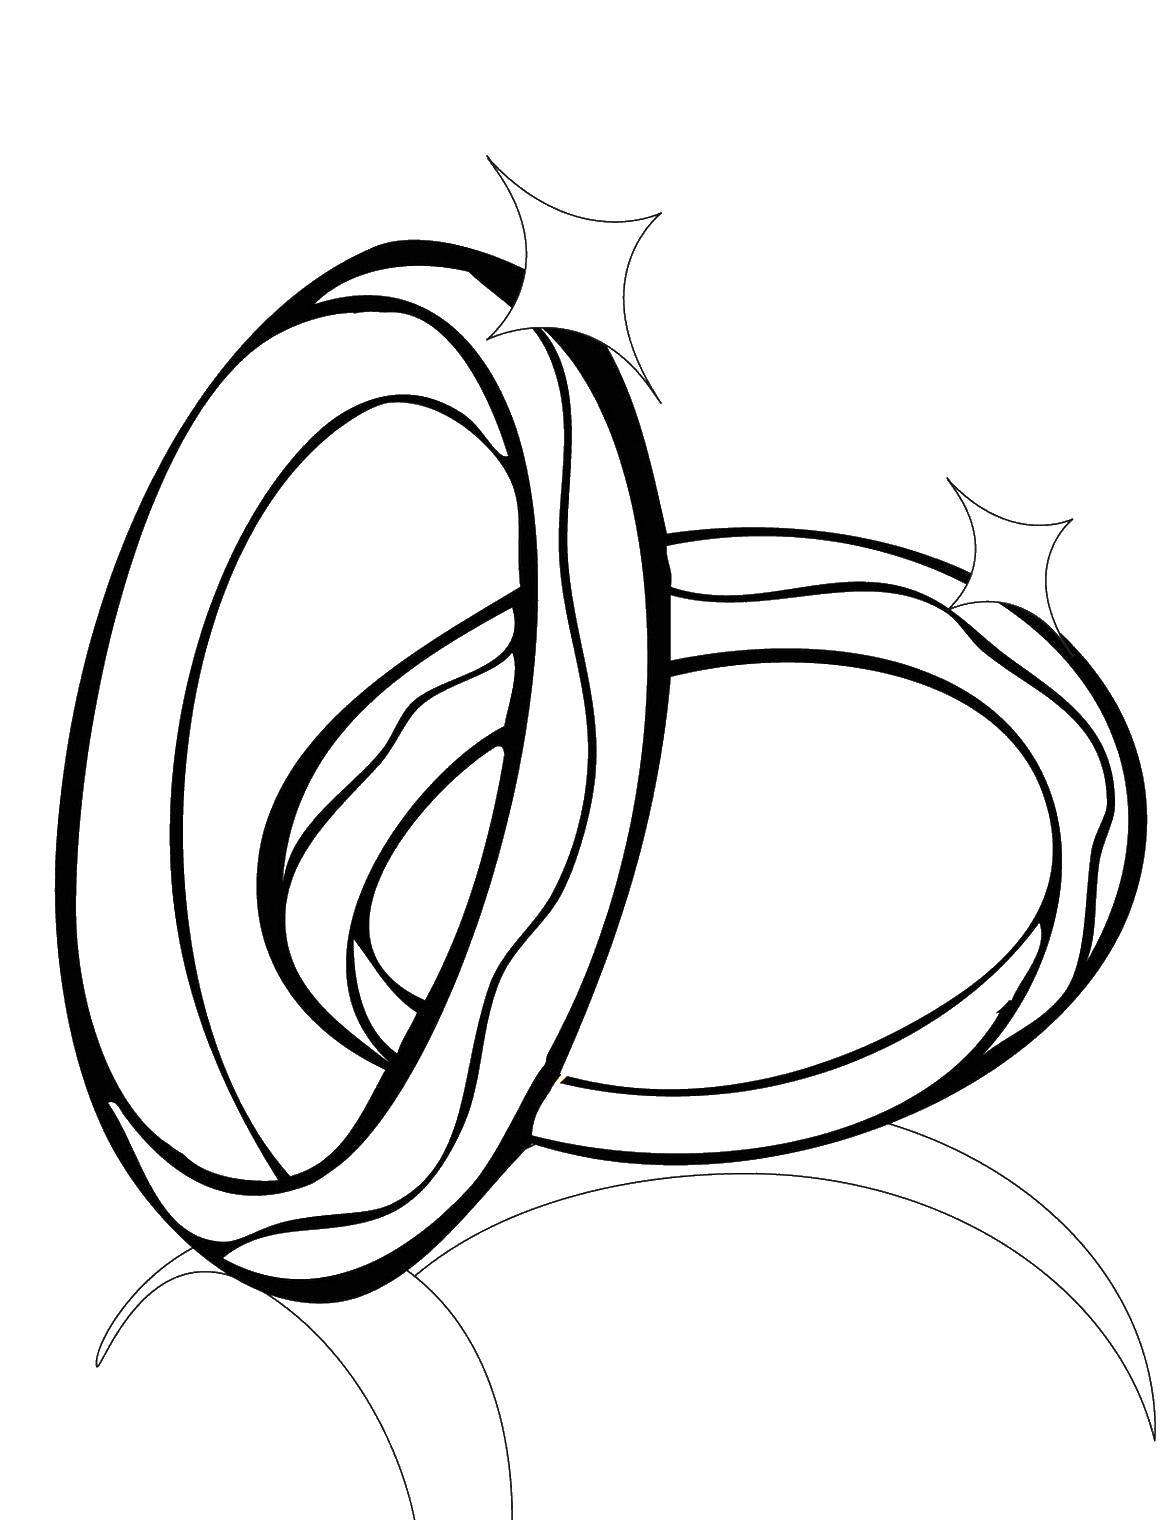 Coloring Two rings. Category ring. Tags:  ring obruchka.